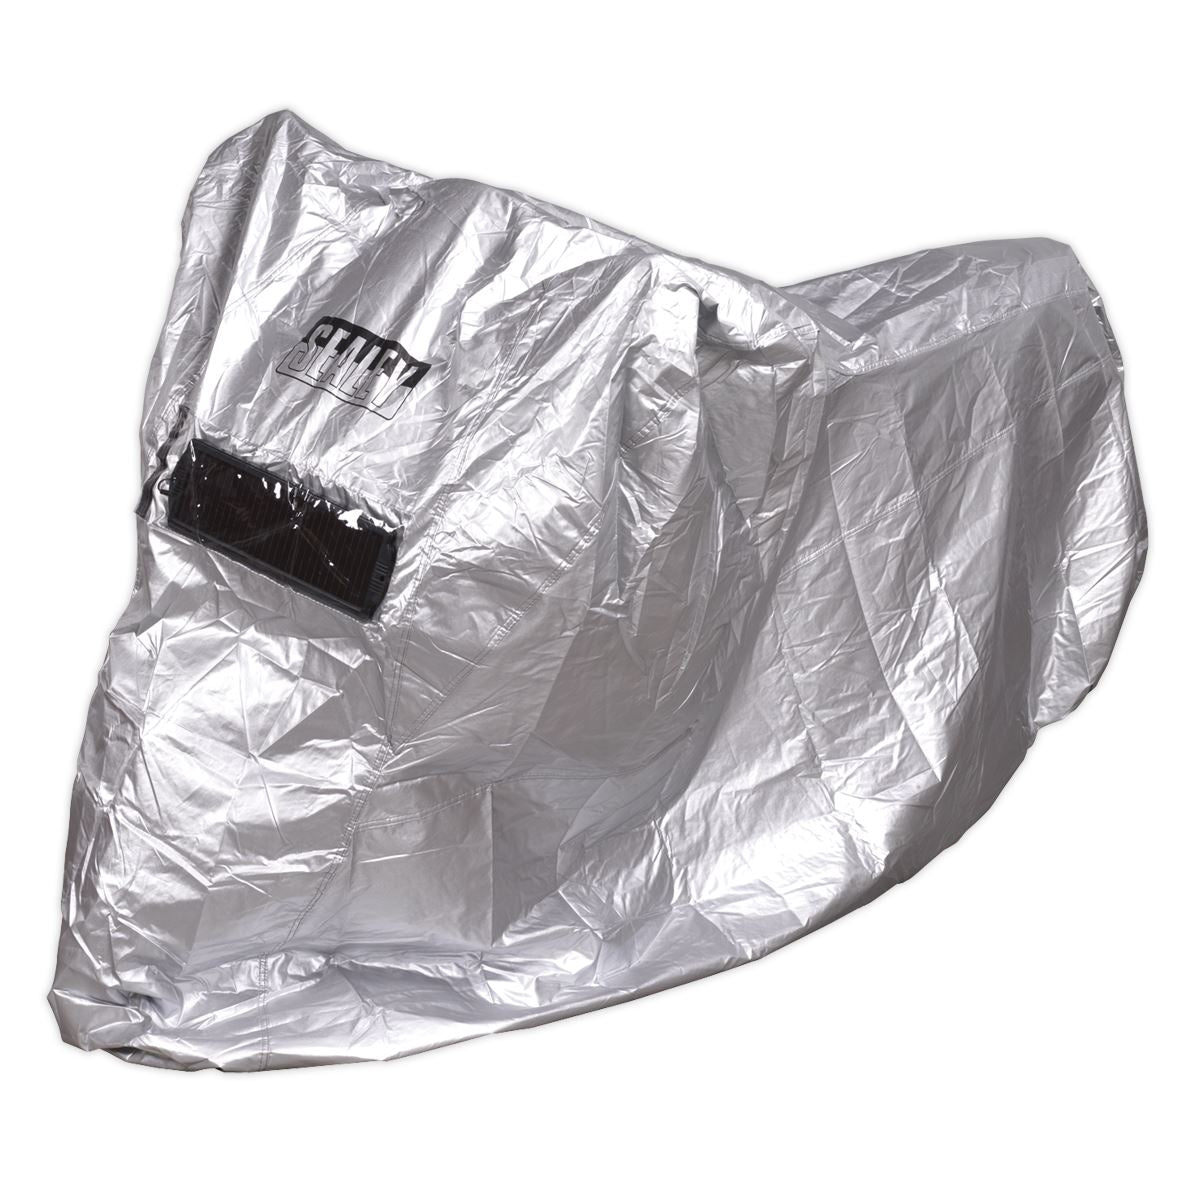 Sealey Motorcycle Cover 2460 x 1050 x 1370mm - Large